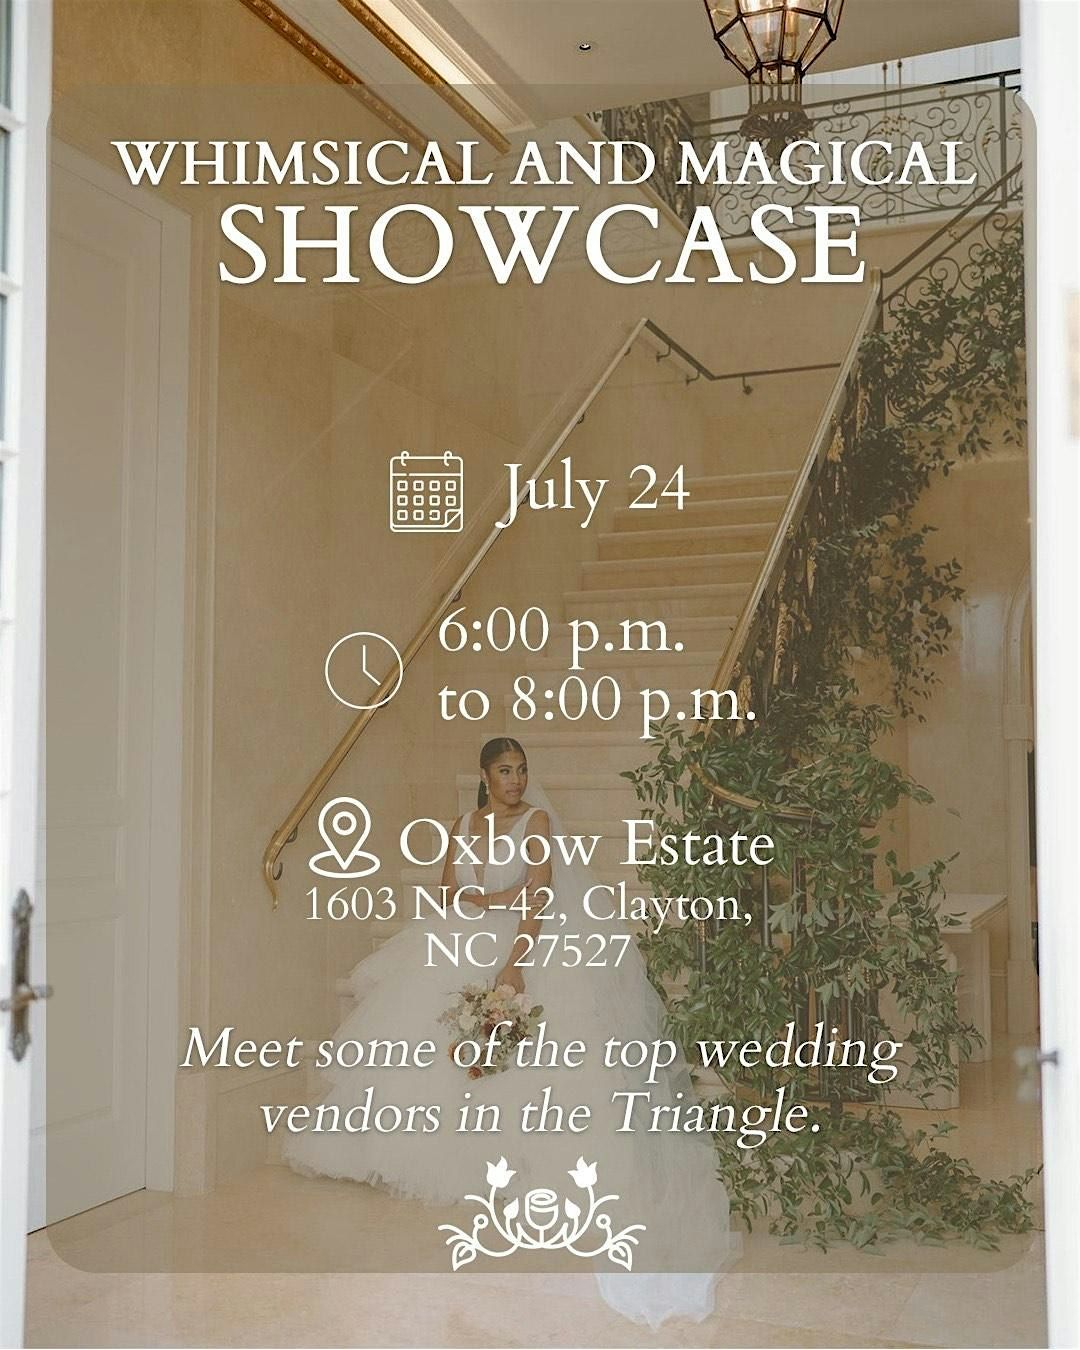 Whimsical and Magical Showcase at Oxbow Estate